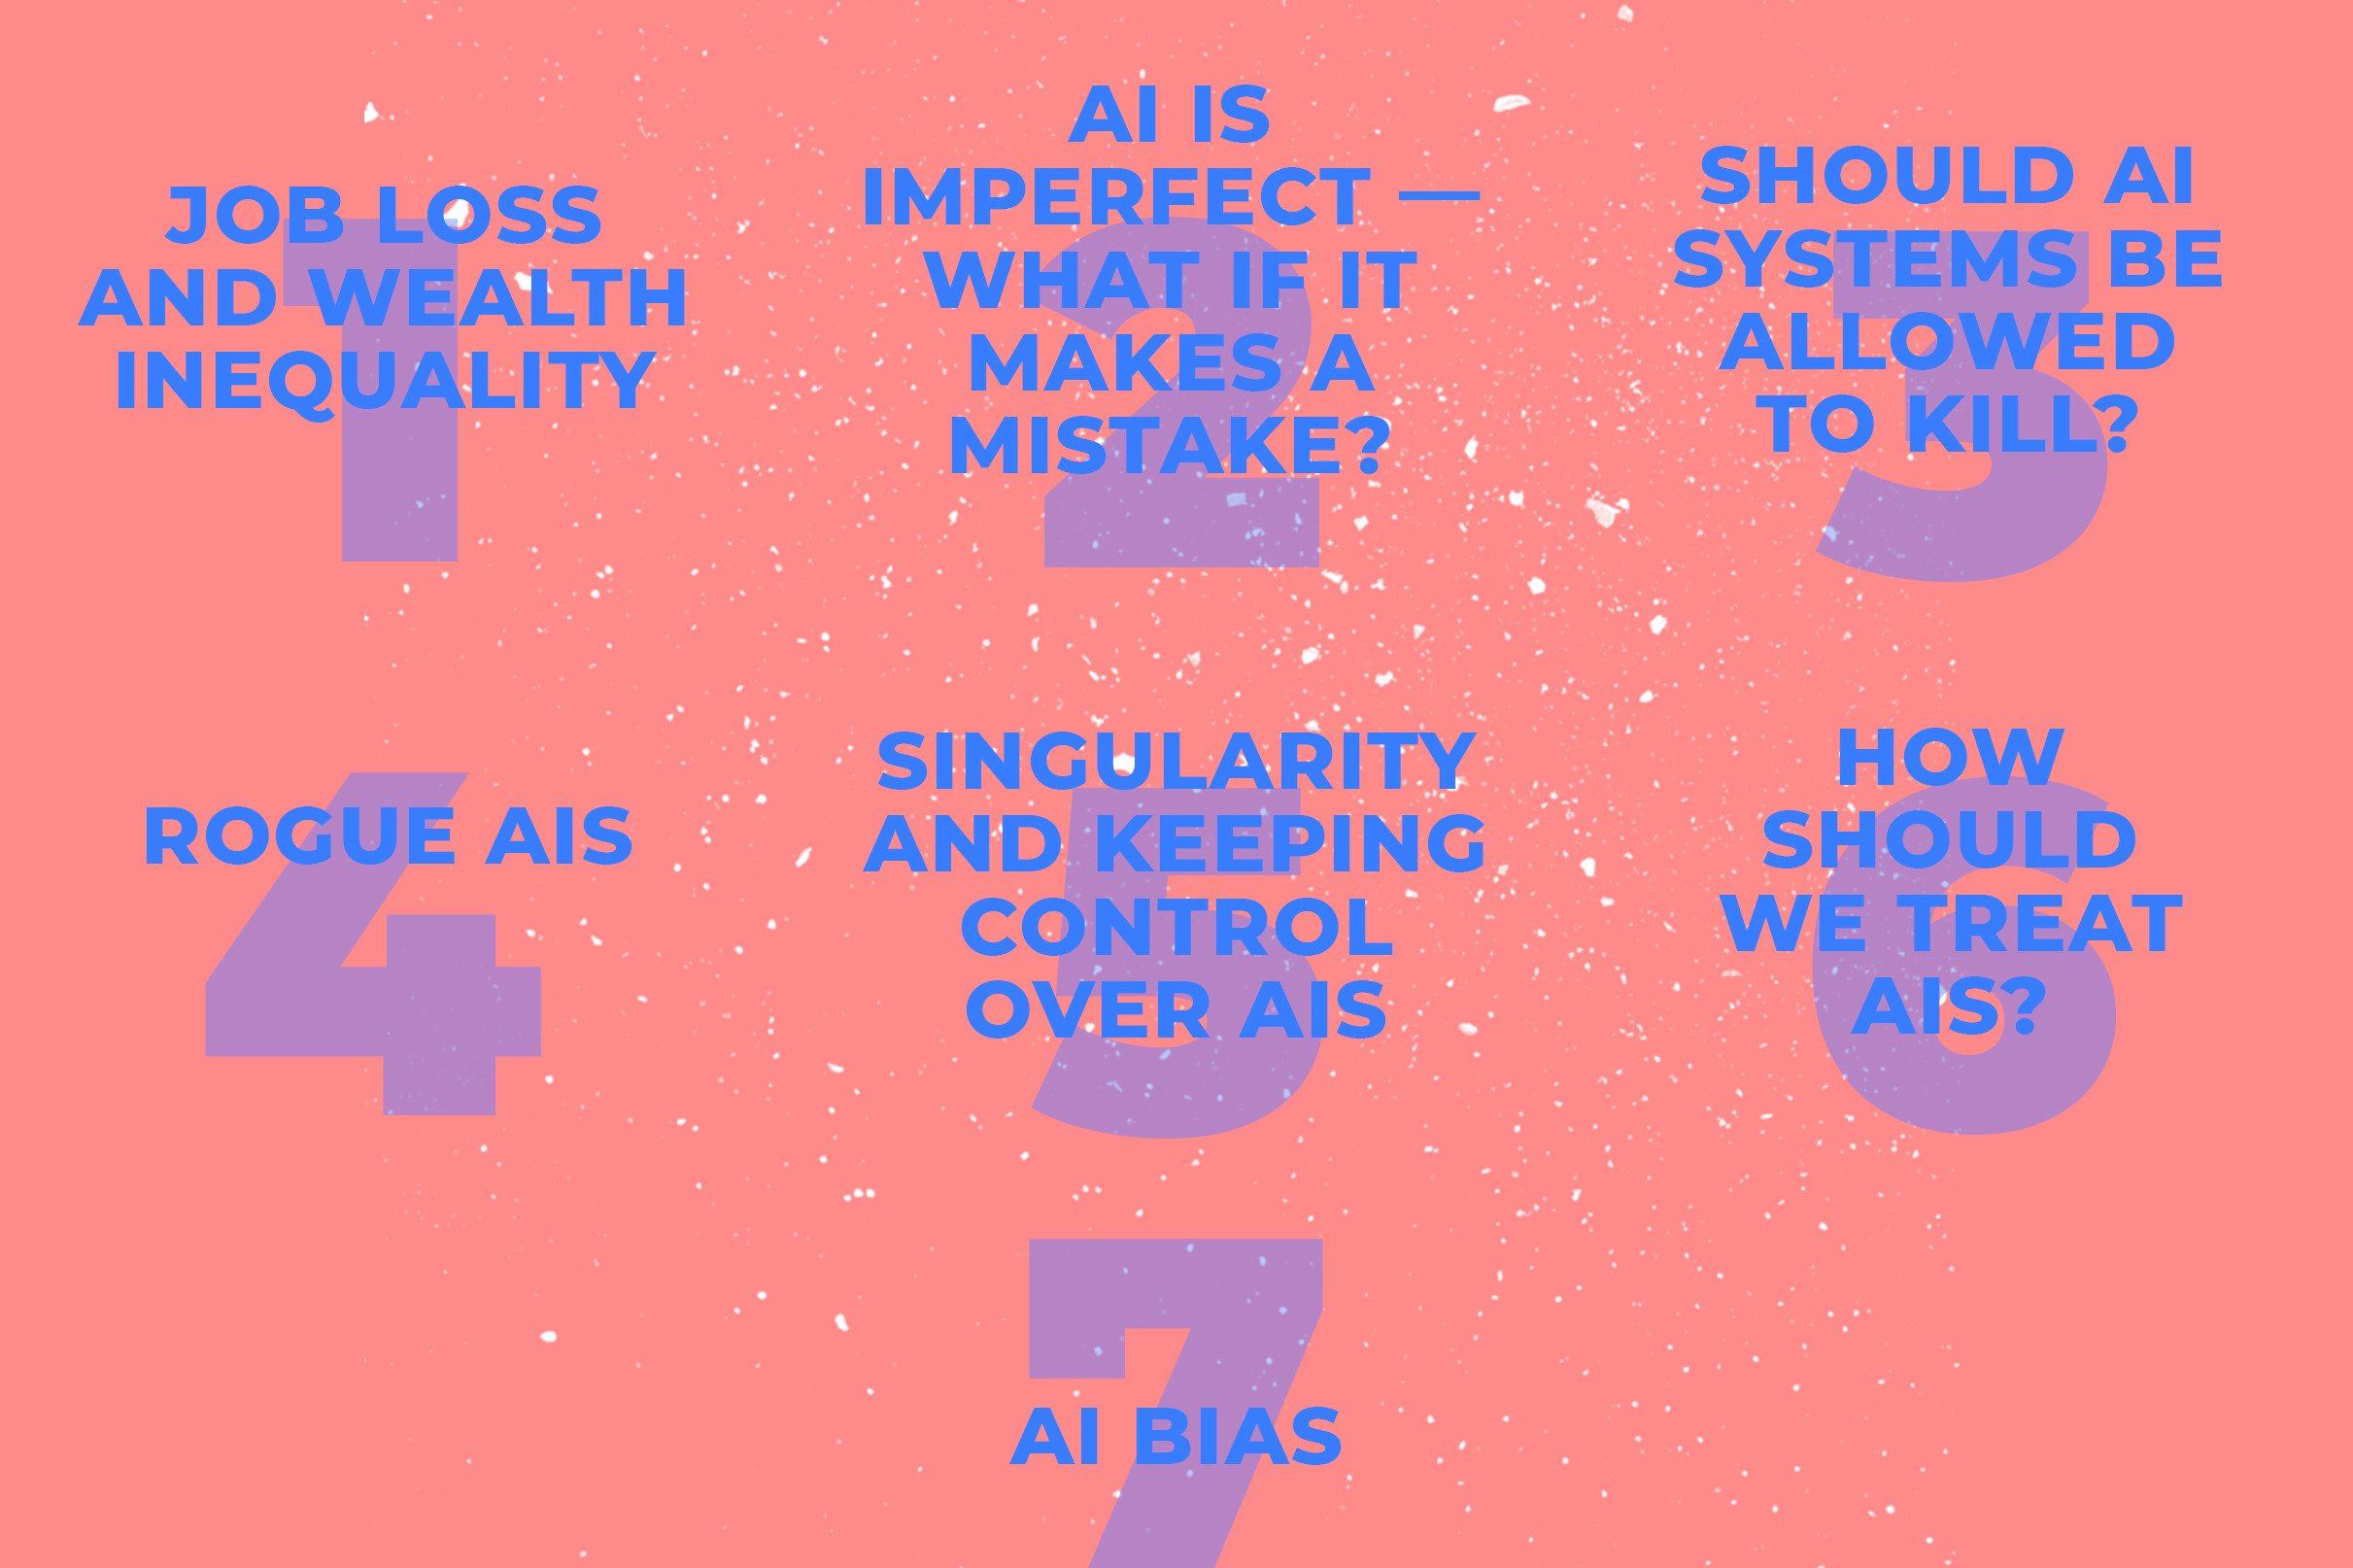 7 Ethical Considerations in the AI Area